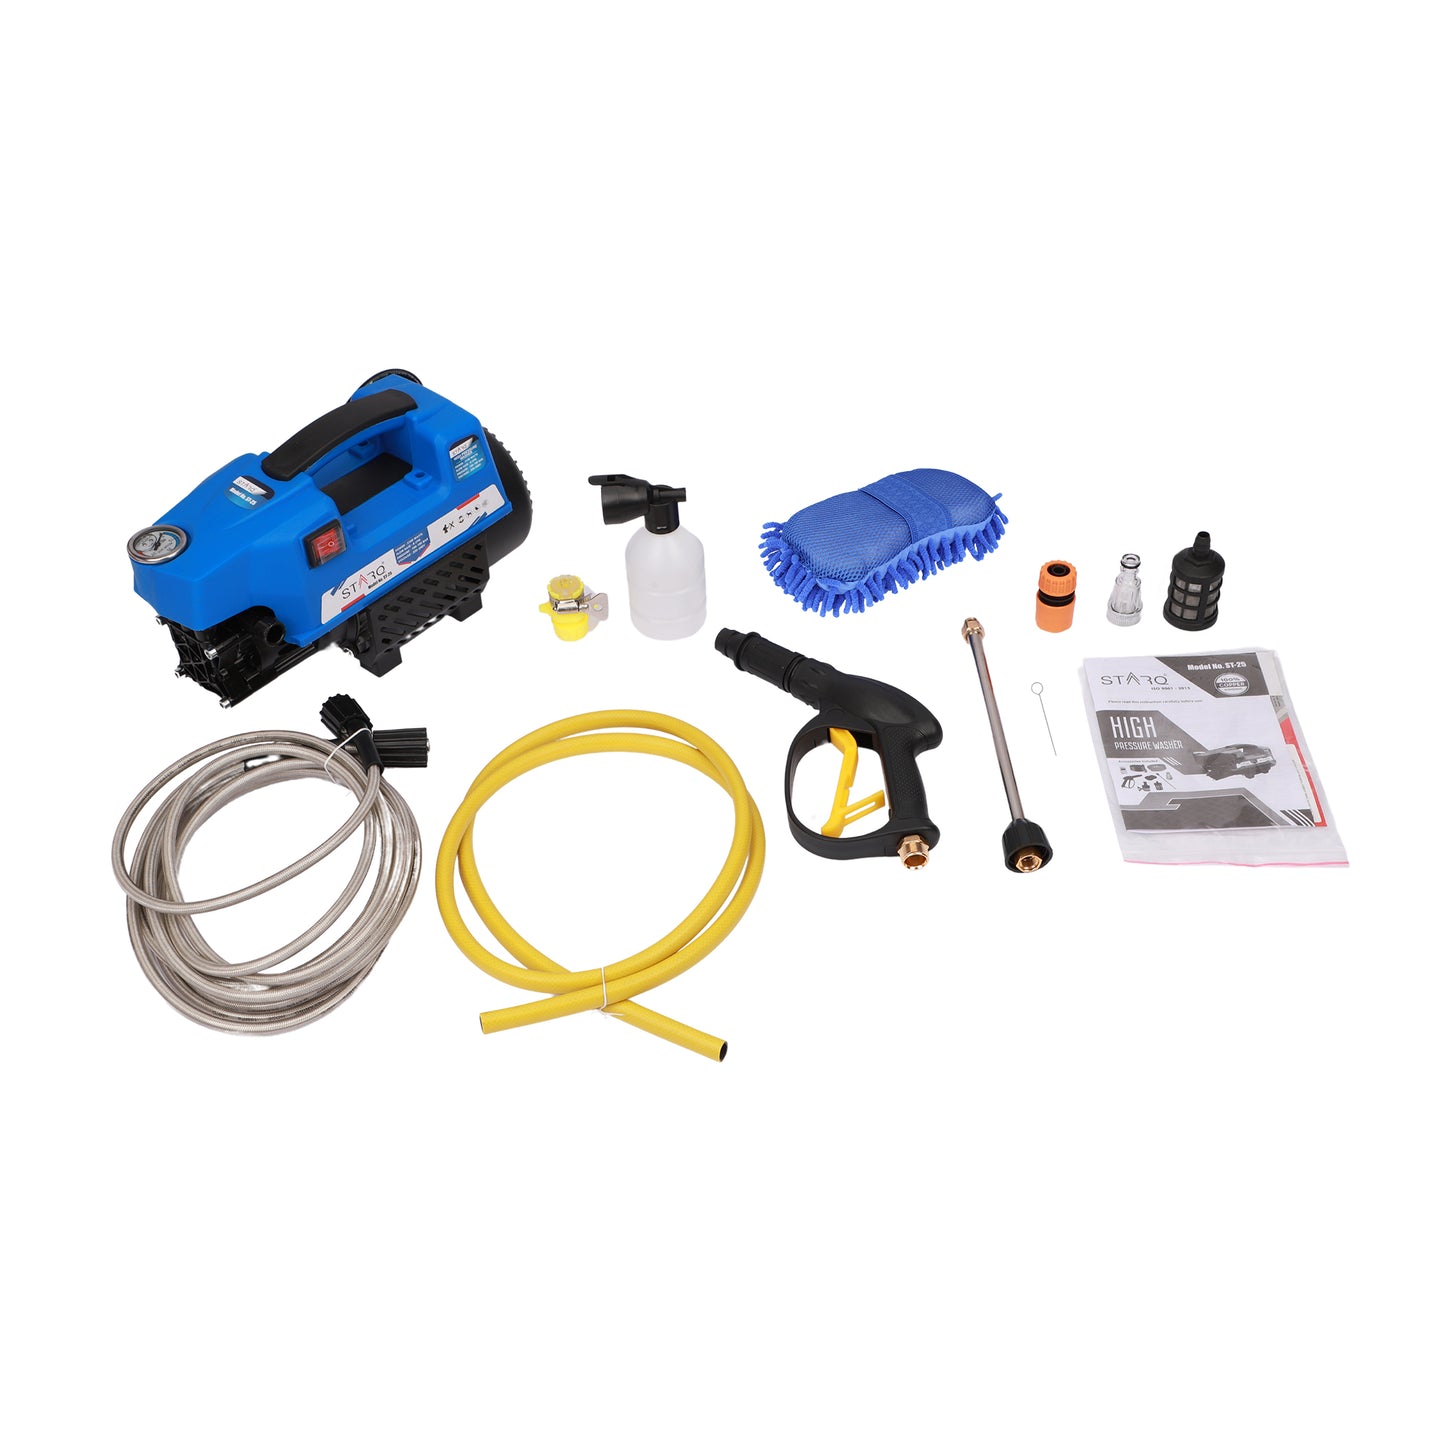 STARQ ST-25 2100 Watts, 150 Bar, 8 Mtr. Outlet Hose Pressure Washer